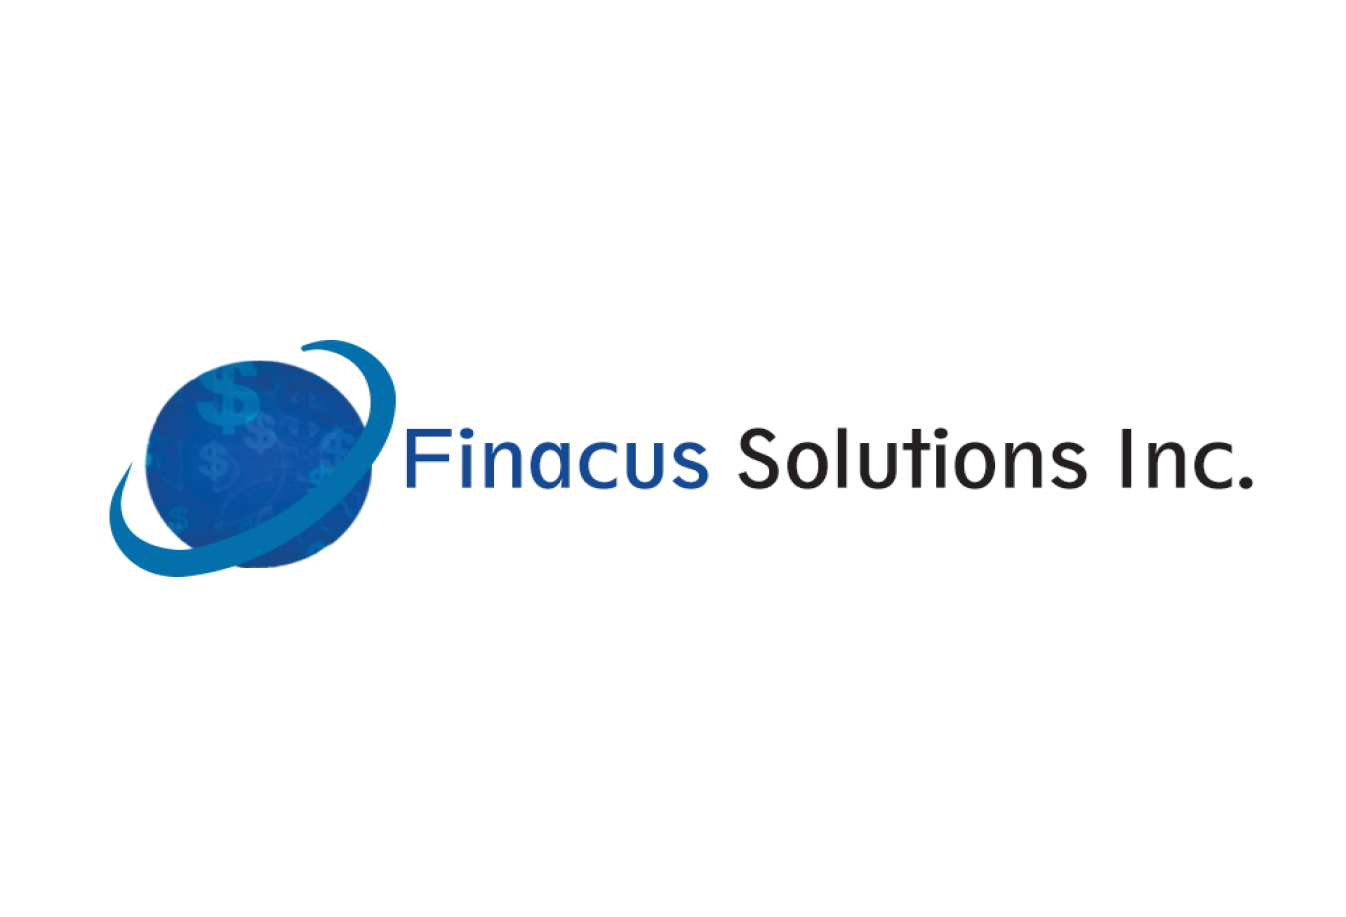 Finacus-Solutions-Inc.-White-Background-2.png